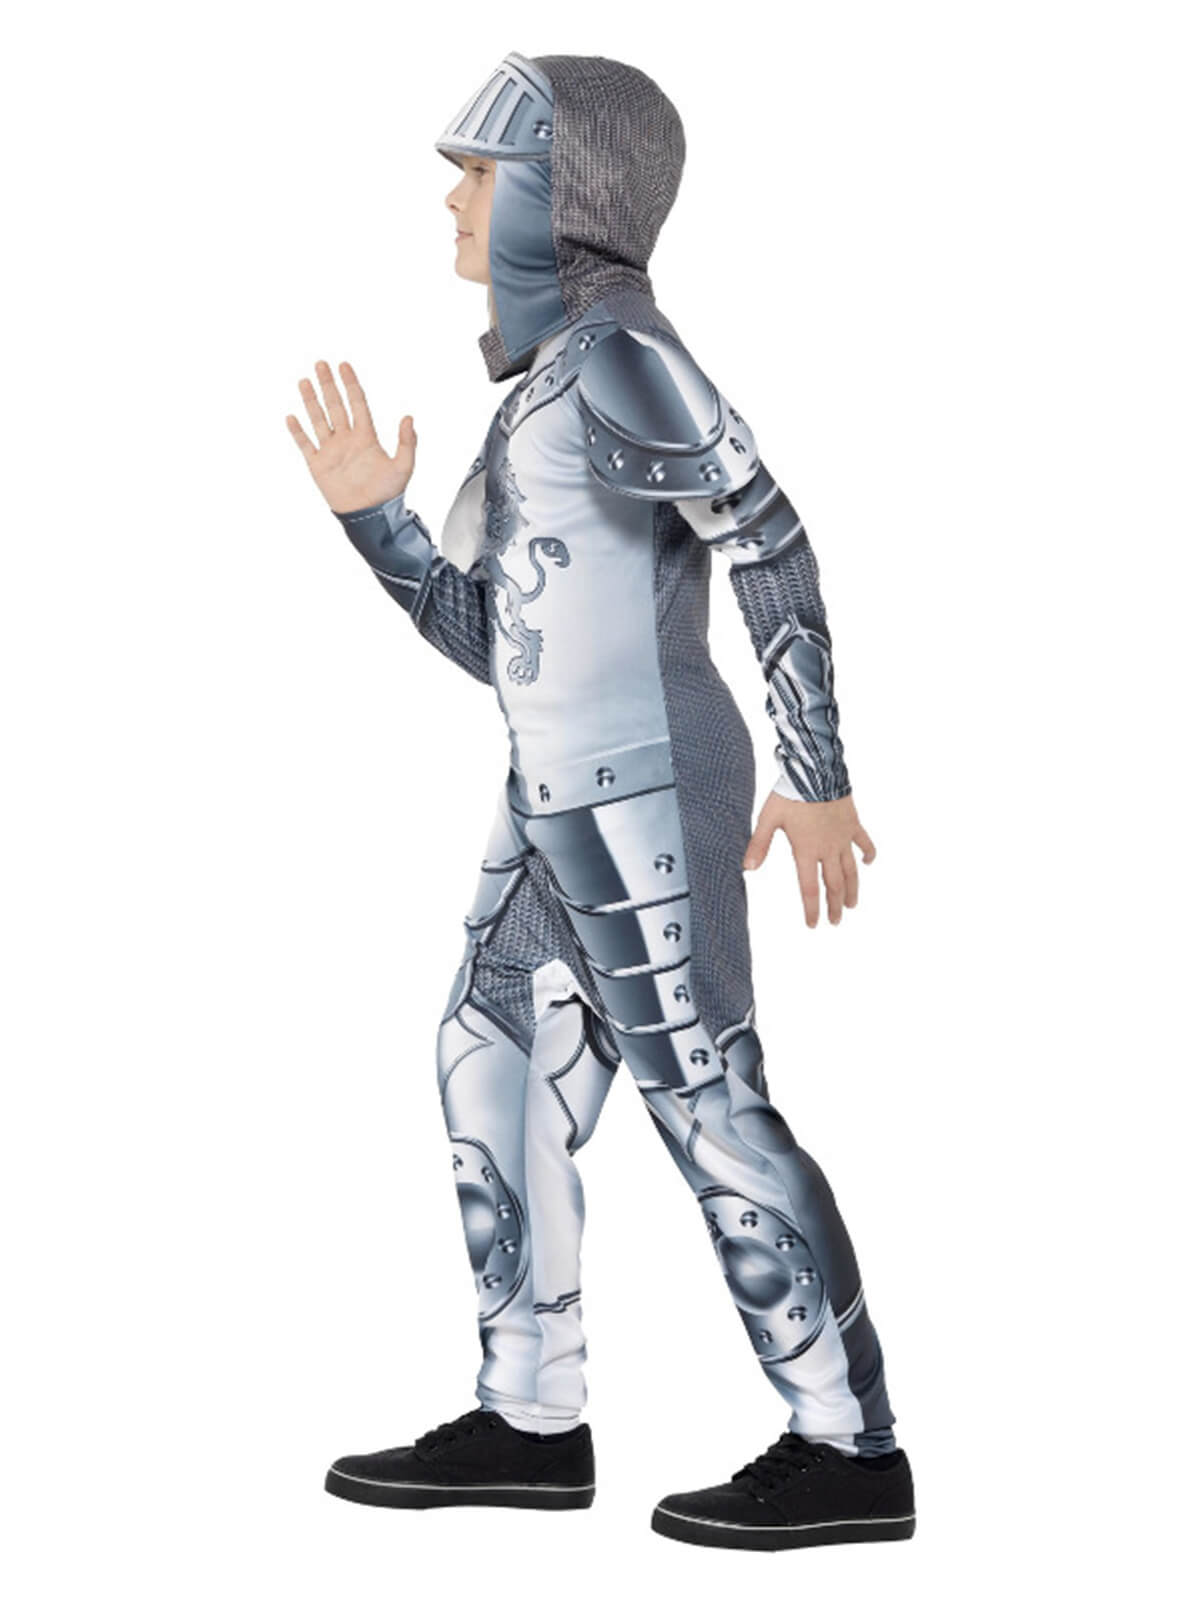 Deluxe Armoured Knight Costume, Grey